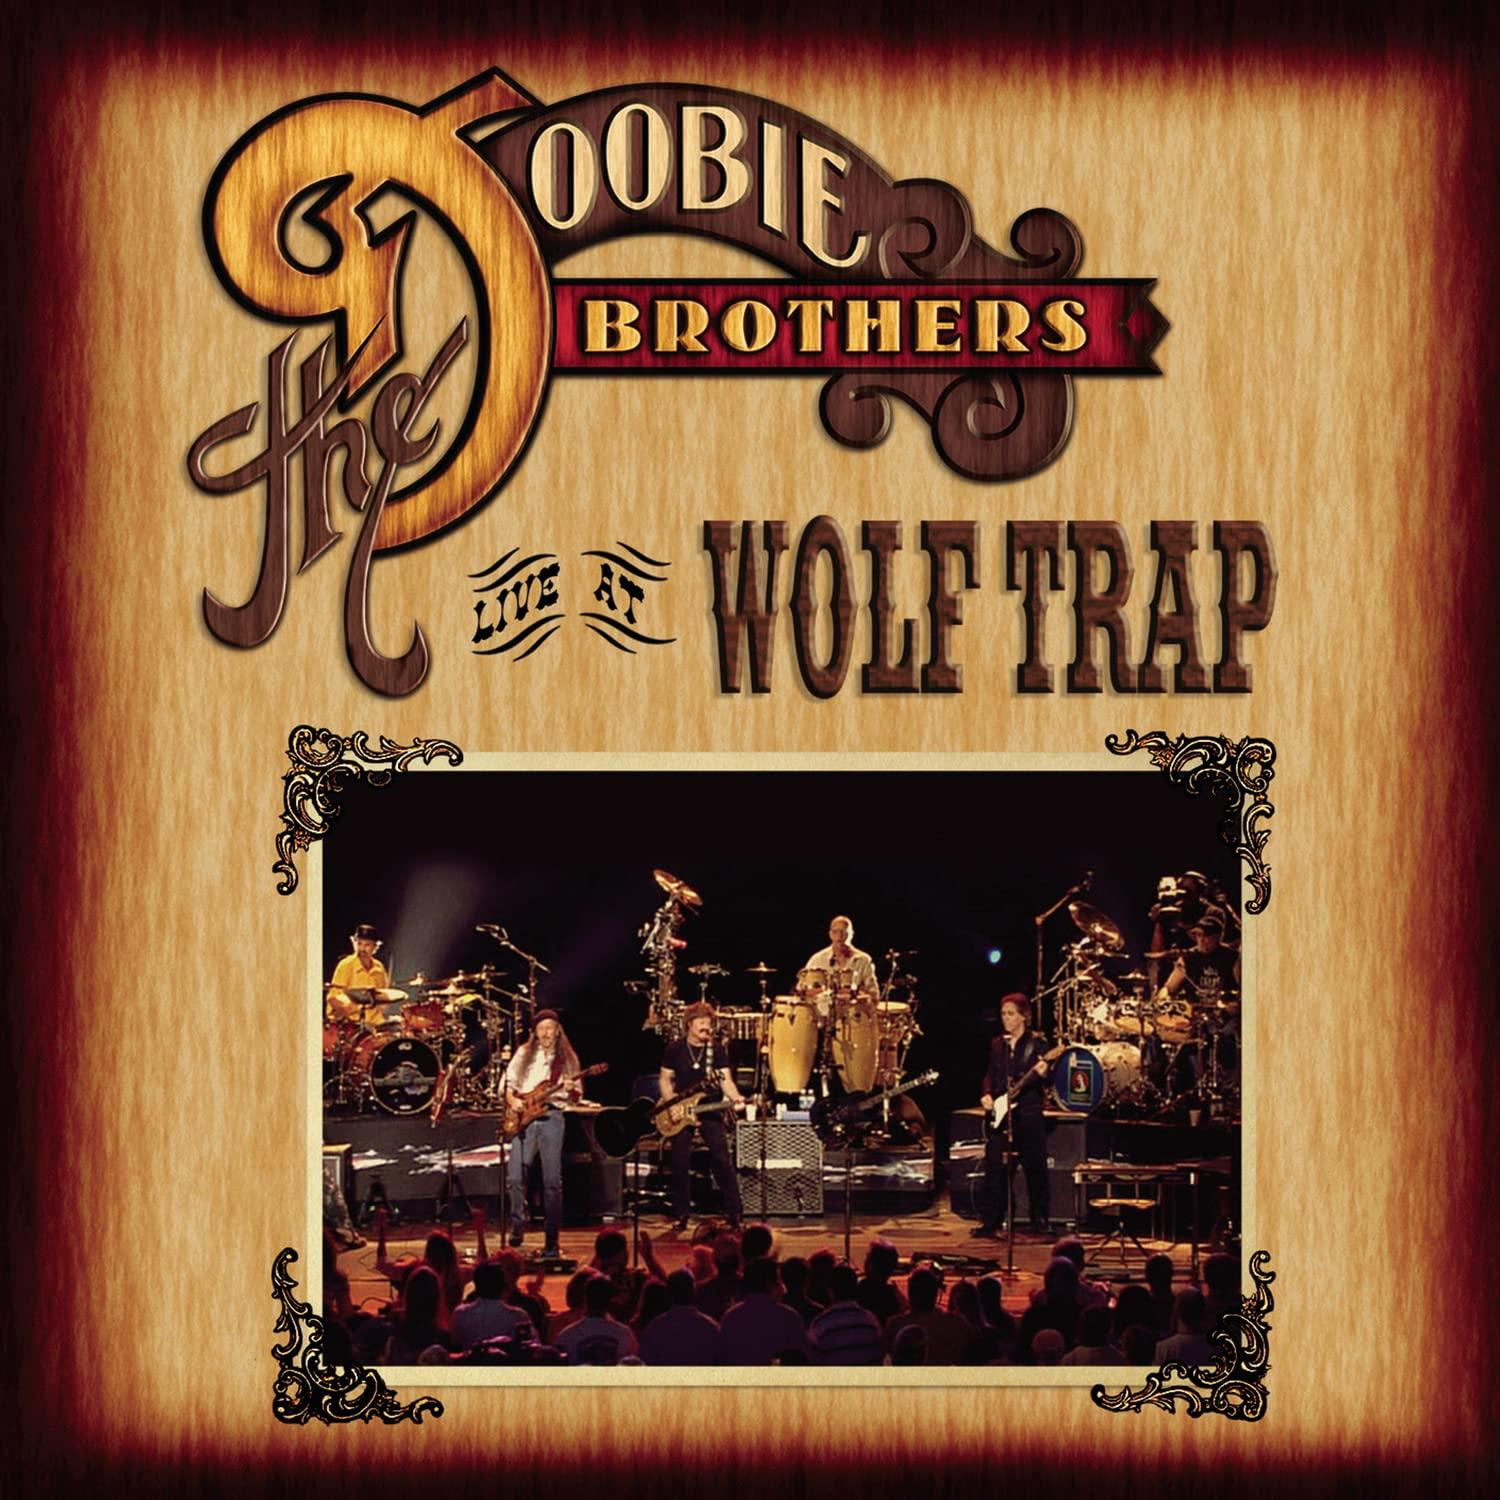 Live - Video) Brothers At (CD The Trap DVD - Doobie + Wolf